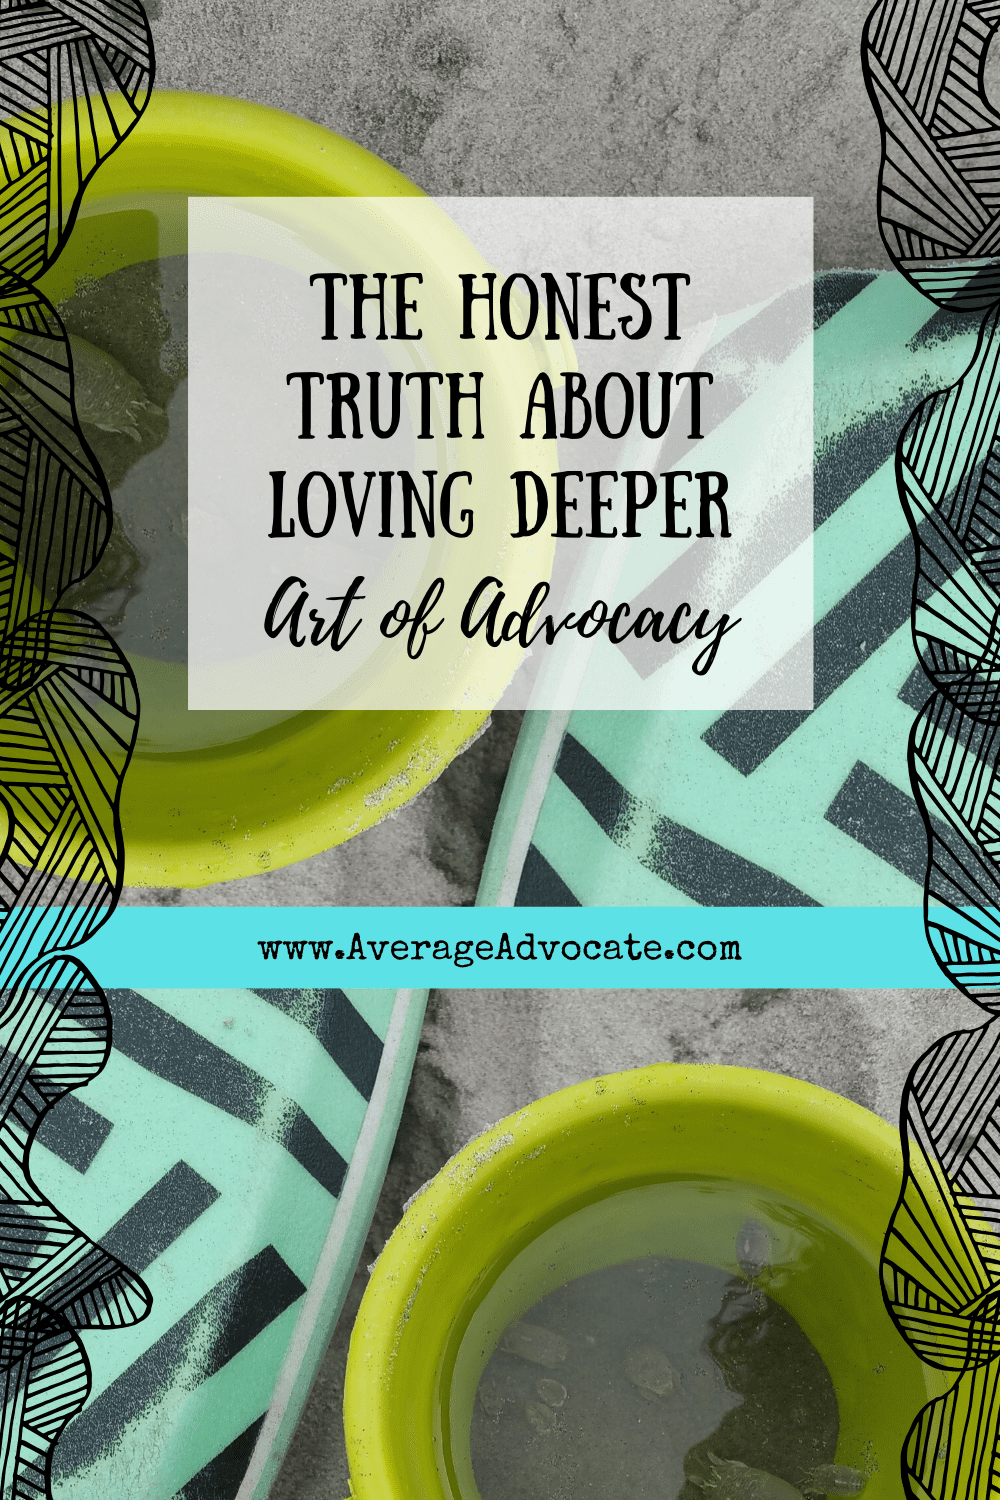 The Honest Truth About Loving Deeper (Art of Advocacy) - The